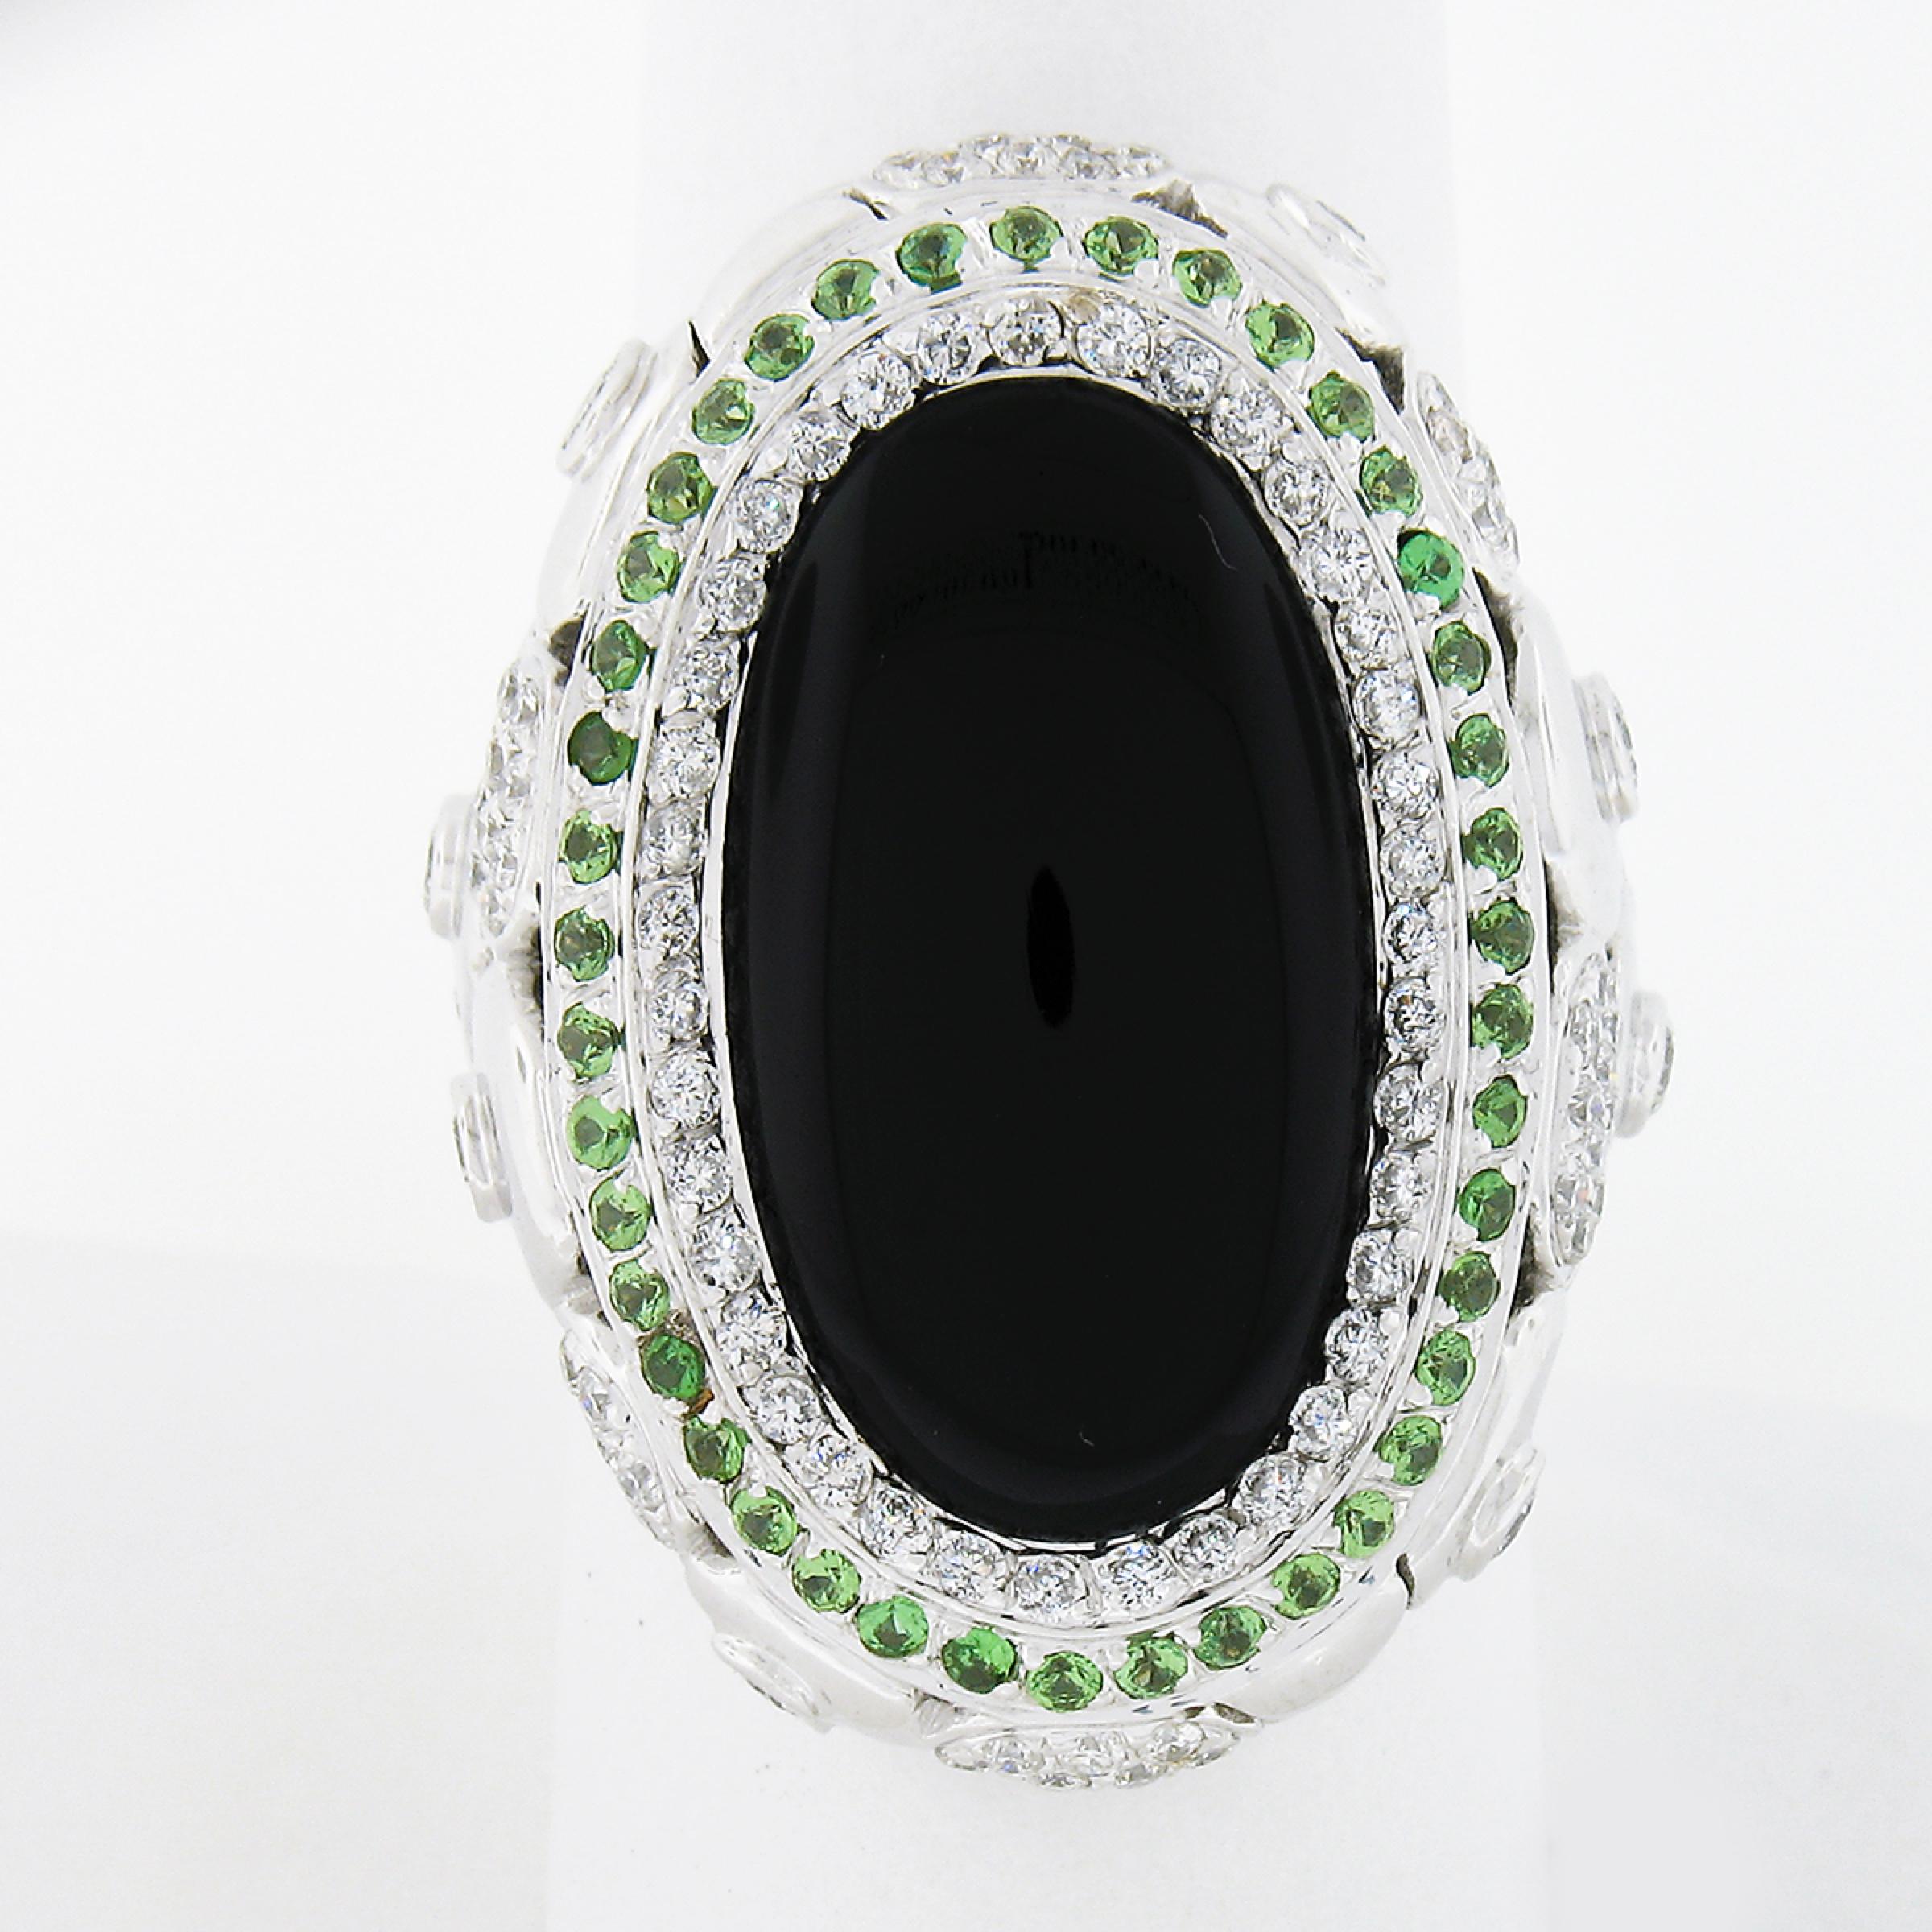 This beautiful statement ring is crafted in solid 18k white gold and features a large black onyx solitaire with fine diamond and Tsavorites accents throughout. The oval cabochon cut onyx shows a nice black color with a polished finish and is further